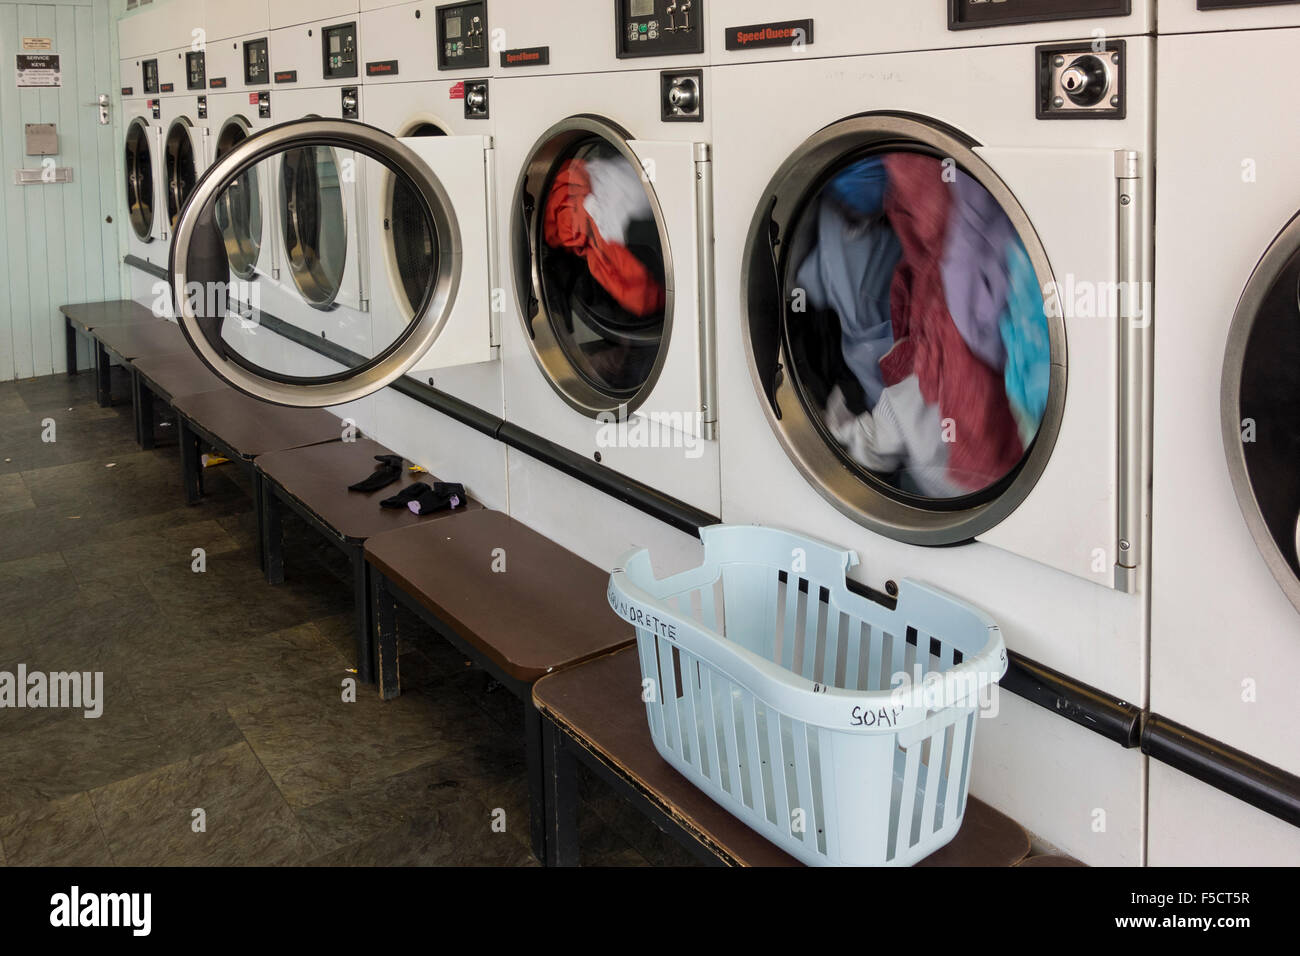 Interior of laundrette (tumble drier in action), UK Stock Photo